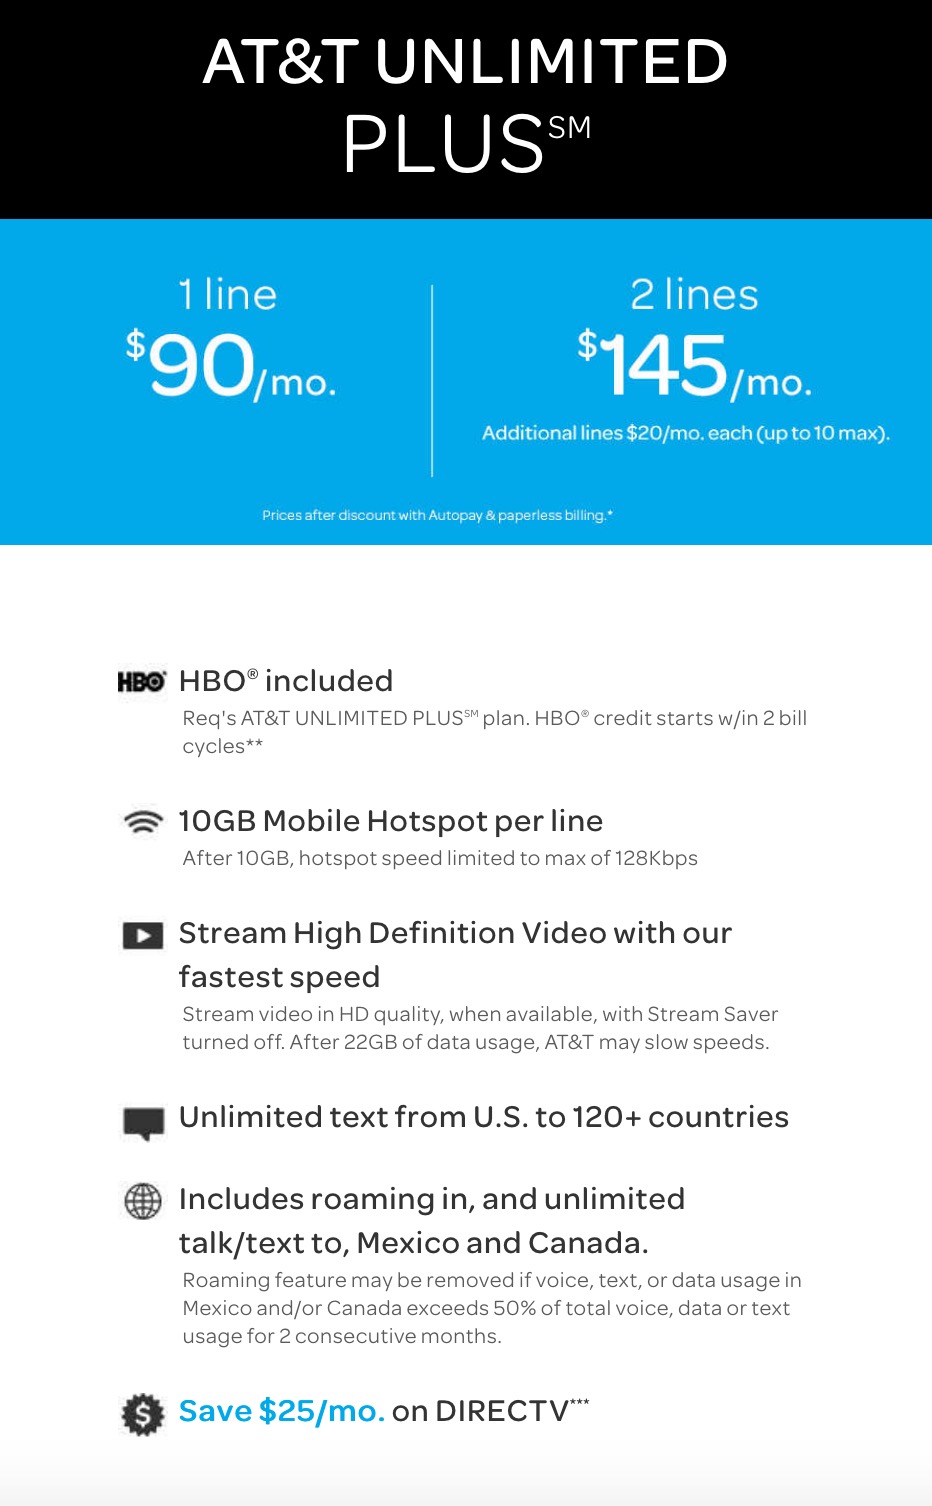 AT&amp;T Offers Free HBO Subscription With Unlimited Plus Wireless Plan